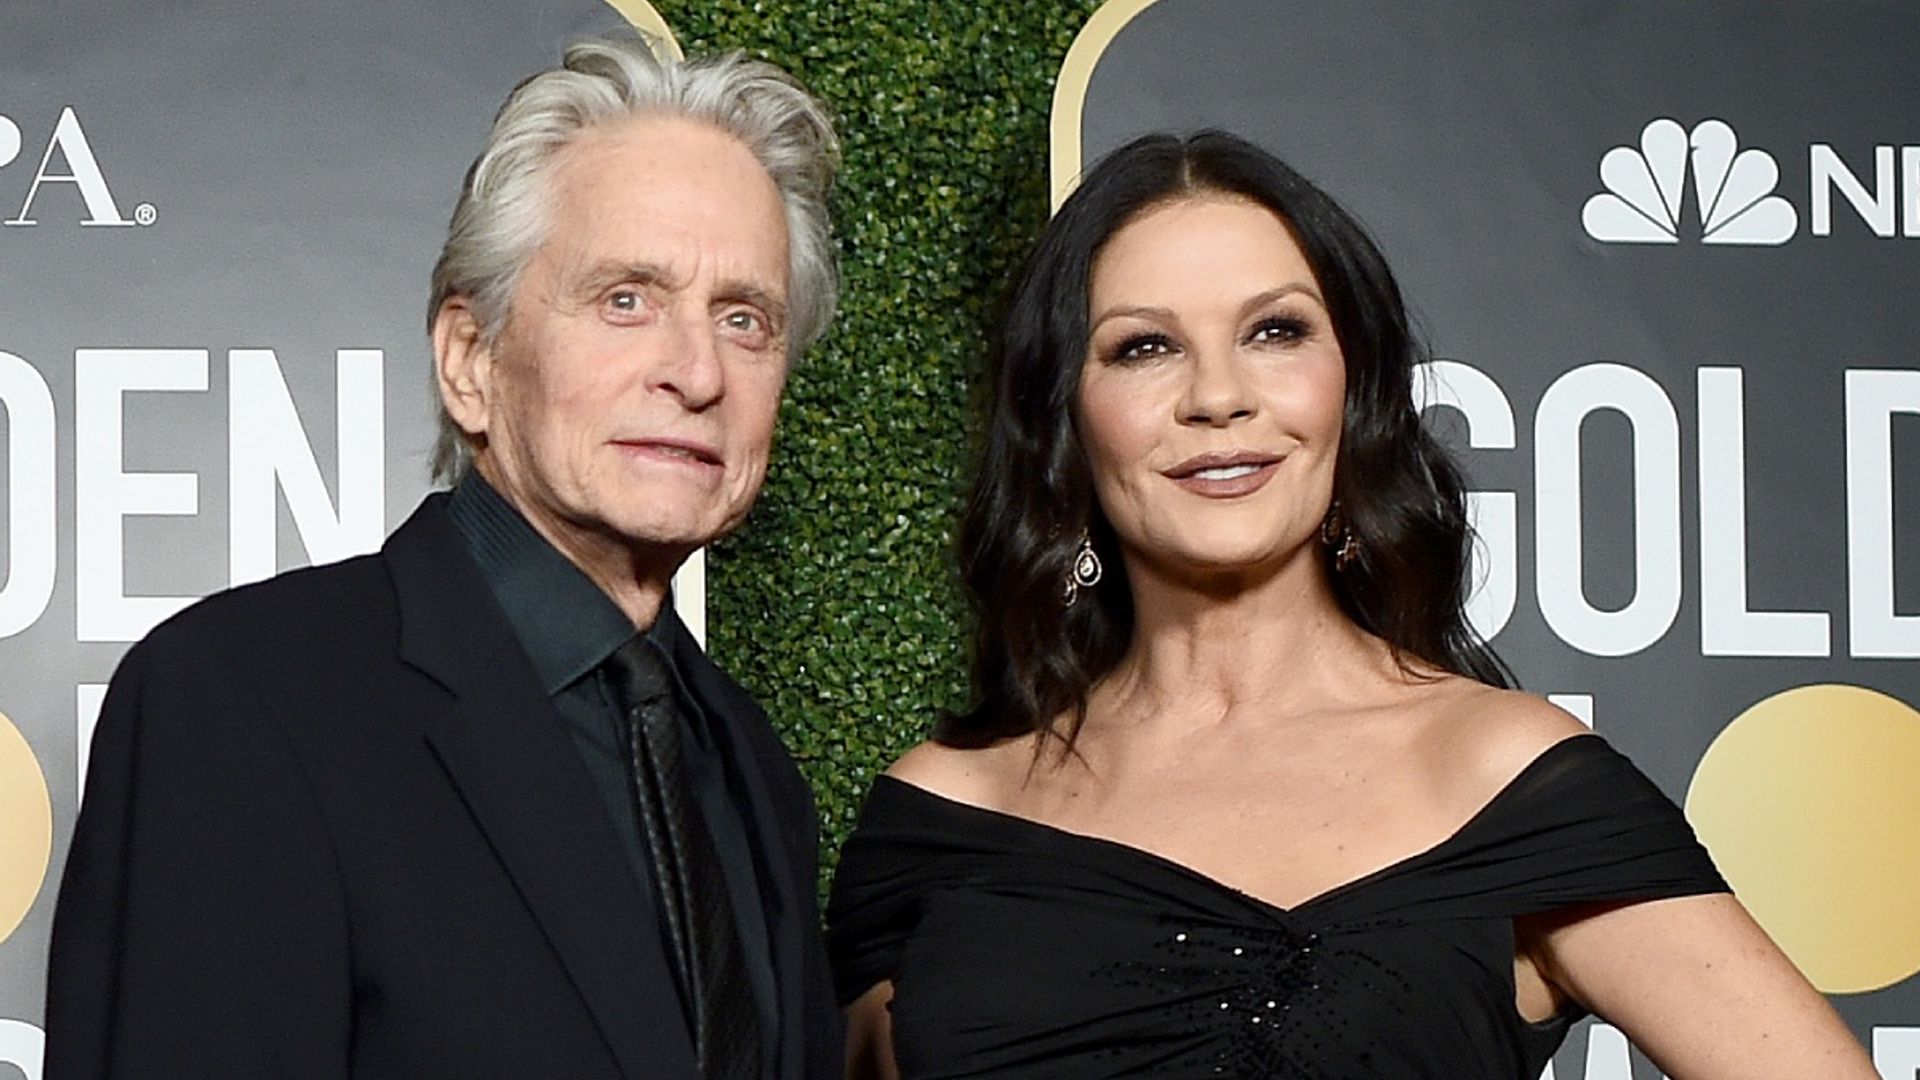 Michael Douglas' show of support for wife Catherine Zeta-Jones leaves fans in awe